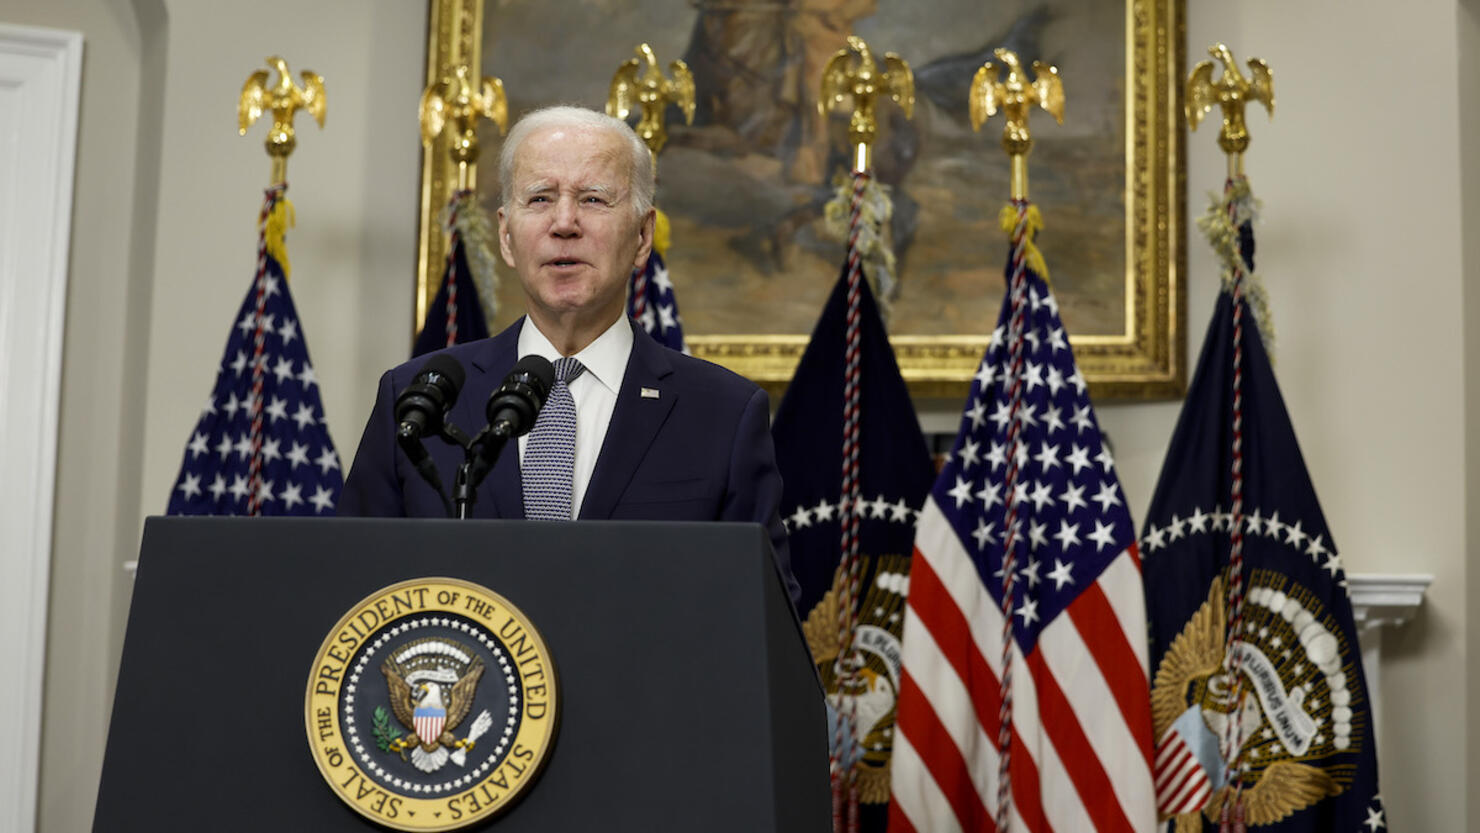 President Biden Speaks On The U.S. Banking System, After  Recent Bank Collapses